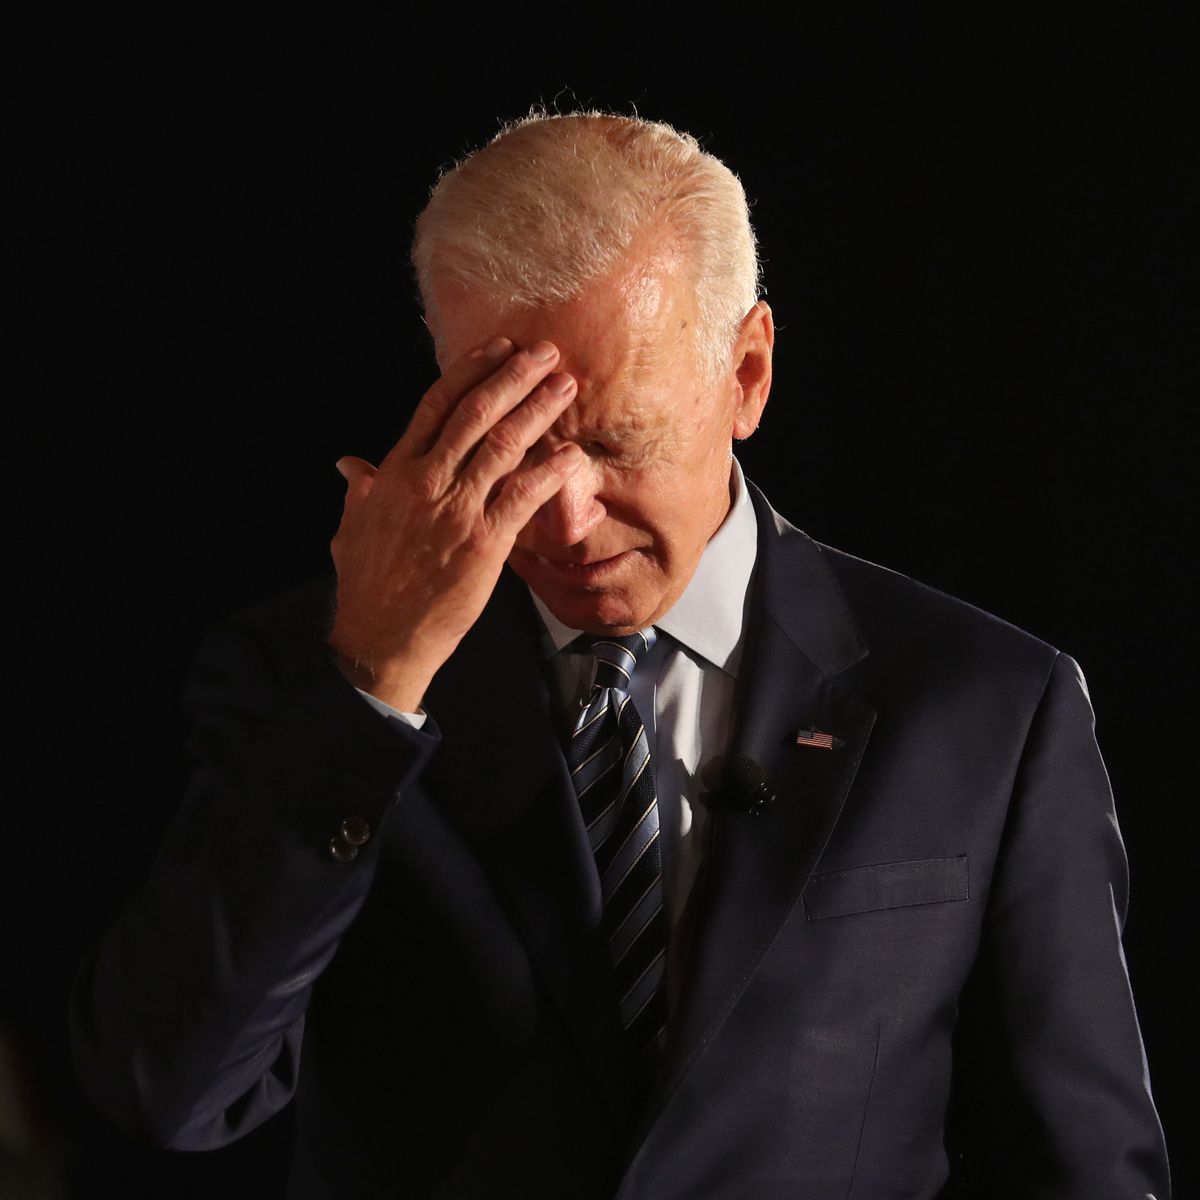 what does joe biden think about the memes - Biden|President|Joe|Years|Trump|Delaware|Vice|Time|Obama|Senate|States|Law|Age|Campaign|Election|Administration|Family|House|Senator|Office|School|Wife|People|Hunter|University|Act|State|Year|Life|Party|Committee|Children|Beau|Daughter|War|Jill|Day|Facts|Americans|Presidency|Joe Biden|United States|Vice President|White House|Law School|President Trump|Foreign Relations Committee|Donald Trump|President Biden|Presidential Campaign|Presidential Election|Democratic Party|Syracuse University|United Nations|Net Worth|Barack Obama|Judiciary Committee|Neilia Hunter|U.S. Senate|Hillary Clinton|New York Times|Obama Administration|Empty Store Shelves|Systemic Racism|Castle County Council|Archmere Academy|U.S. Senator|Vice Presidency|Second Term|Biden Administration